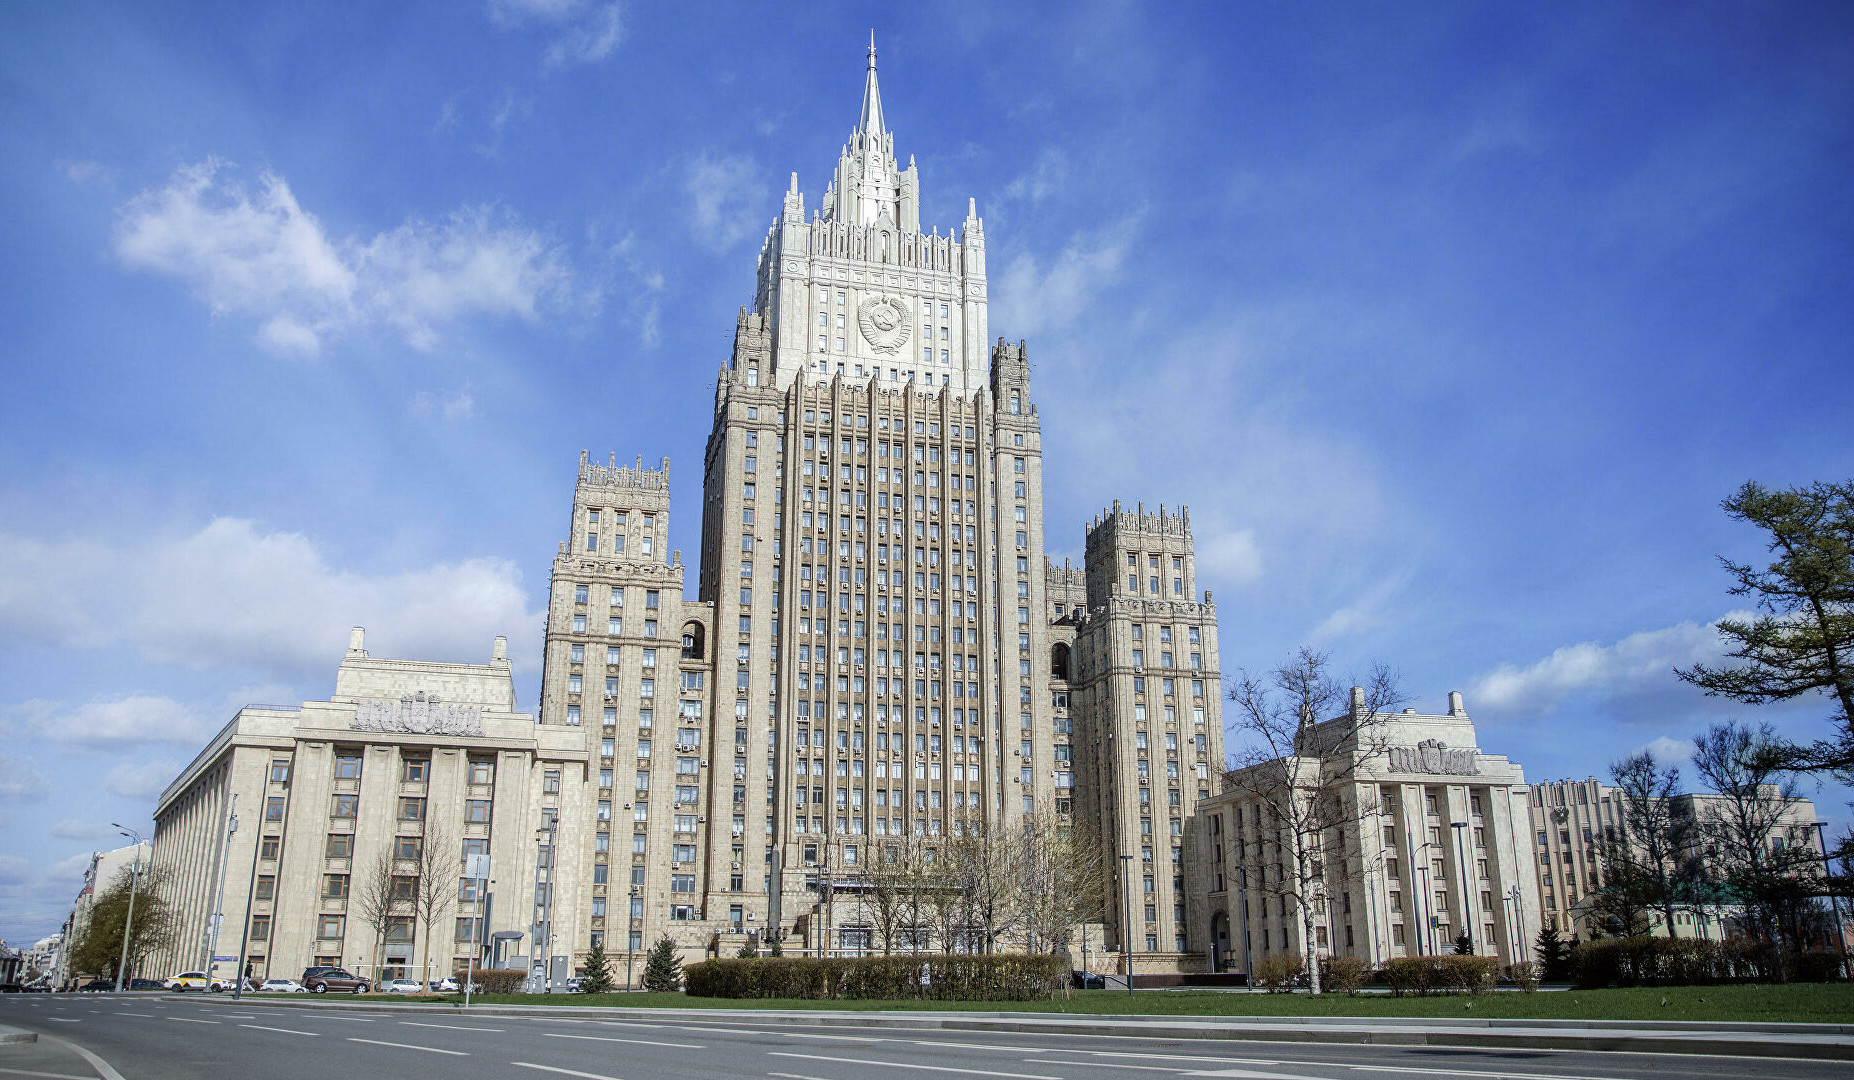 Russia will develop eastern direction, if it is not interesting for European Union: Russia’s Foreign Ministry